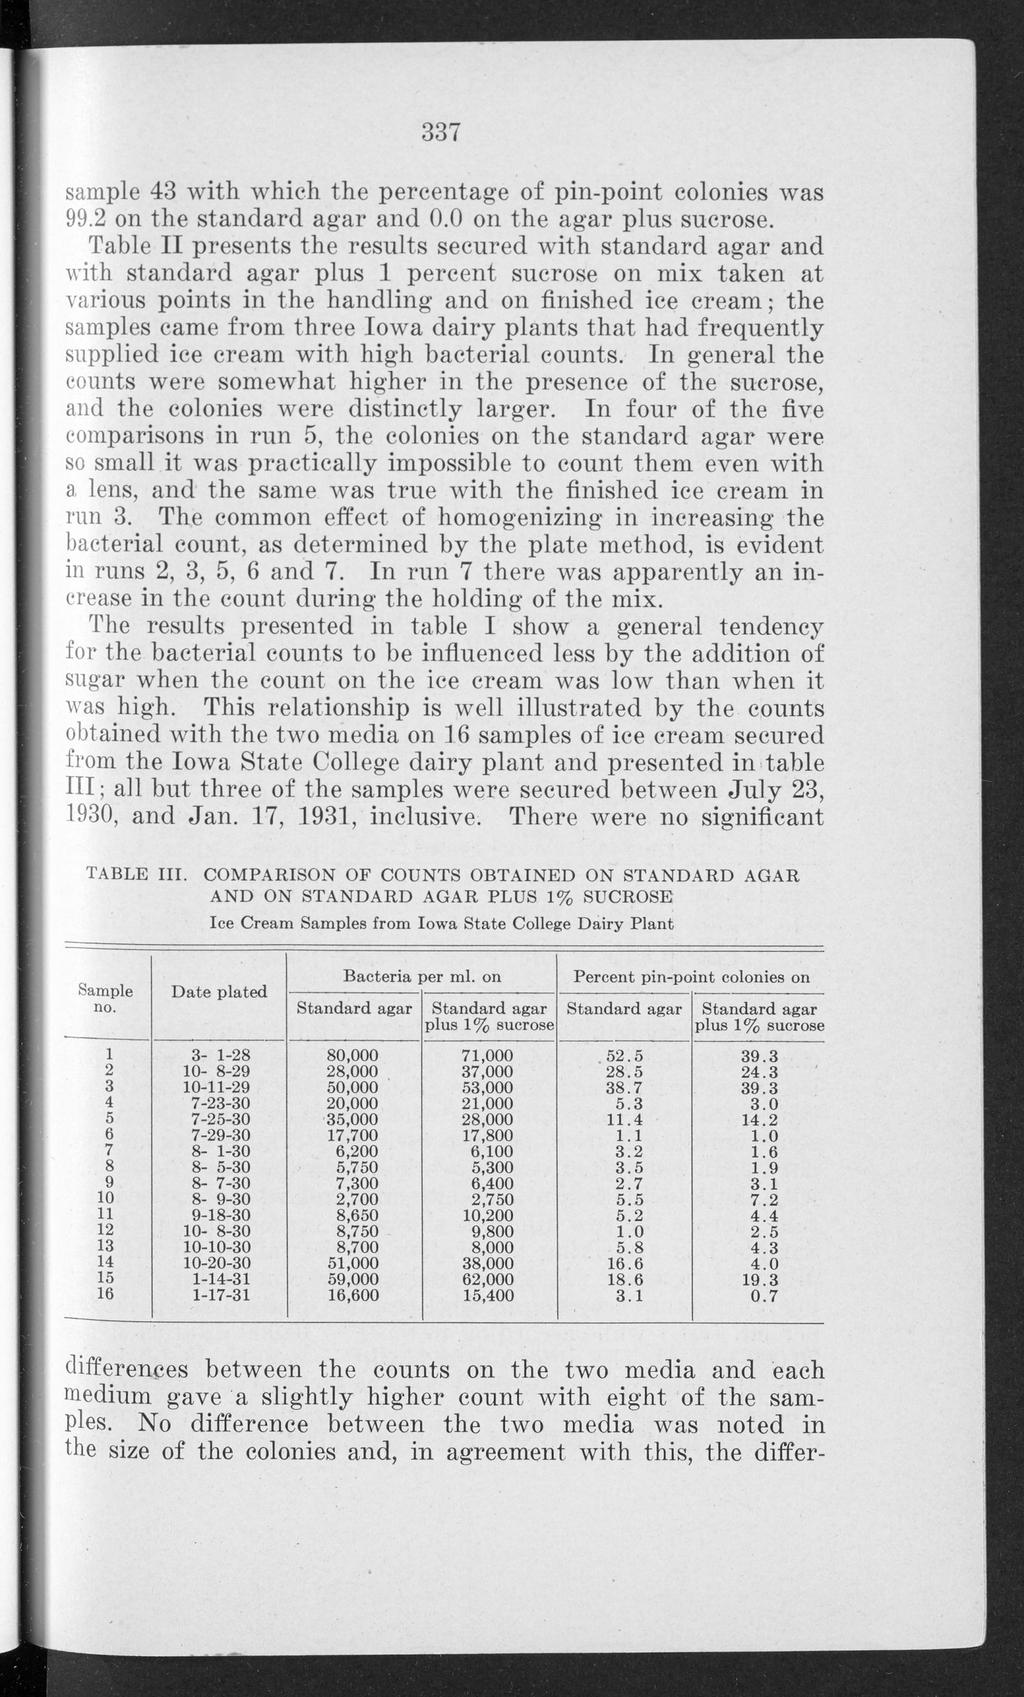 Fabricius and Hammer: Observations on the counting of bacteria in ice cream by the plat 337 sample 43 with which the percentage of pin-point colonies was 99.2 on the standard and 0.0 on the plus.